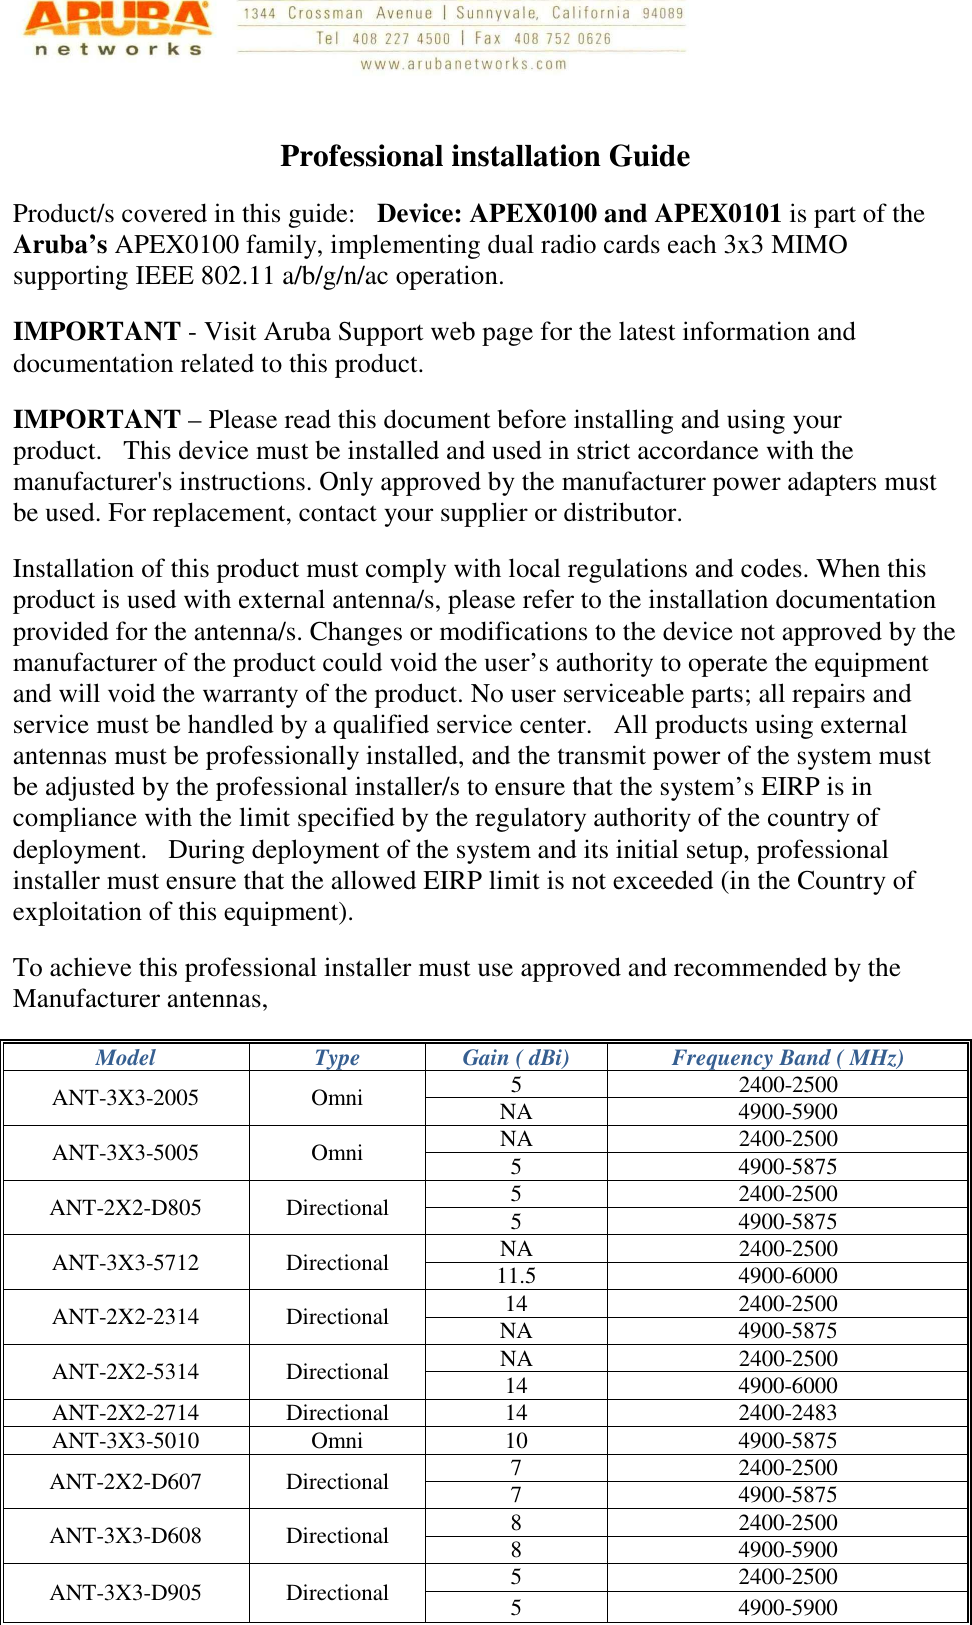    Professional installation Guide Product/s covered in this guide:Device: APEX0100 and APEX0101 is part of the Aruba’s APEX0100 family, implementing dual radio cards each 3x3 MIMO supporting IEEE 802.11 a/b/g/n/ac operation. IMPORTANT - Visit Aruba Support web page for the latest information and documentation related to this product. IMPORTANT – Please read this document before installing and using your product. This device must be installed and used in strict accordance with the manufacturer&apos;s instructions. Only approved by the manufacturer power adapters must be used. For replacement, contact your supplier or distributor. Installation of this product must comply with local regulations and codes. When this product is used with external antenna/s, please refer to the installation documentation provided for the antenna/s. Changes or modifications to the device not approved by the manufacturer of the product could void the user’s authority to operate the equipment and will void the warranty of the product. No user serviceable parts; all repairs and service must be handled by a qualified service center. All products using external antennas must be professionally installed, and the transmit power of the system must be adjusted by the professional installer/s to ensure that the system’s EIRP is in compliance with the limit specified by the regulatory authority of the country of deployment. During deployment of the system and its initial setup, professional installer must ensure that the allowed EIRP limit is not exceeded (in the Country of exploitation of this equipment). To achieve this professional installer must use approved and recommended by the Manufacturer antennas, Model  Type  Gain ( dBi)  Frequency Band ( MHz) ANT-3X3-2005  Omni  5  2400-2500 NA  4900-5900 ANT-3X3-5005  Omni  NA  2400-2500 5  4900-5875 ANT-2X2-D805  Directional  5  2400-2500 5  4900-5875 ANT-3X3-5712  Directional  NA  2400-2500 11.5  4900-6000 ANT-2X2-2314  Directional  14  2400-2500 NA  4900-5875 ANT-2X2-5314  Directional  NA  2400-2500 14  4900-6000 ANT-2X2-2714  Directional  14  2400-2483 ANT-3X3-5010  Omni  10  4900-5875 ANT-2X2-D607  Directional  7  2400-2500 7  4900-5875 ANT-3X3-D608  Directional  8  2400-2500 8  4900-5900 ANT-3X3-D905  Directional  5  2400-2500 5  4900-5900 